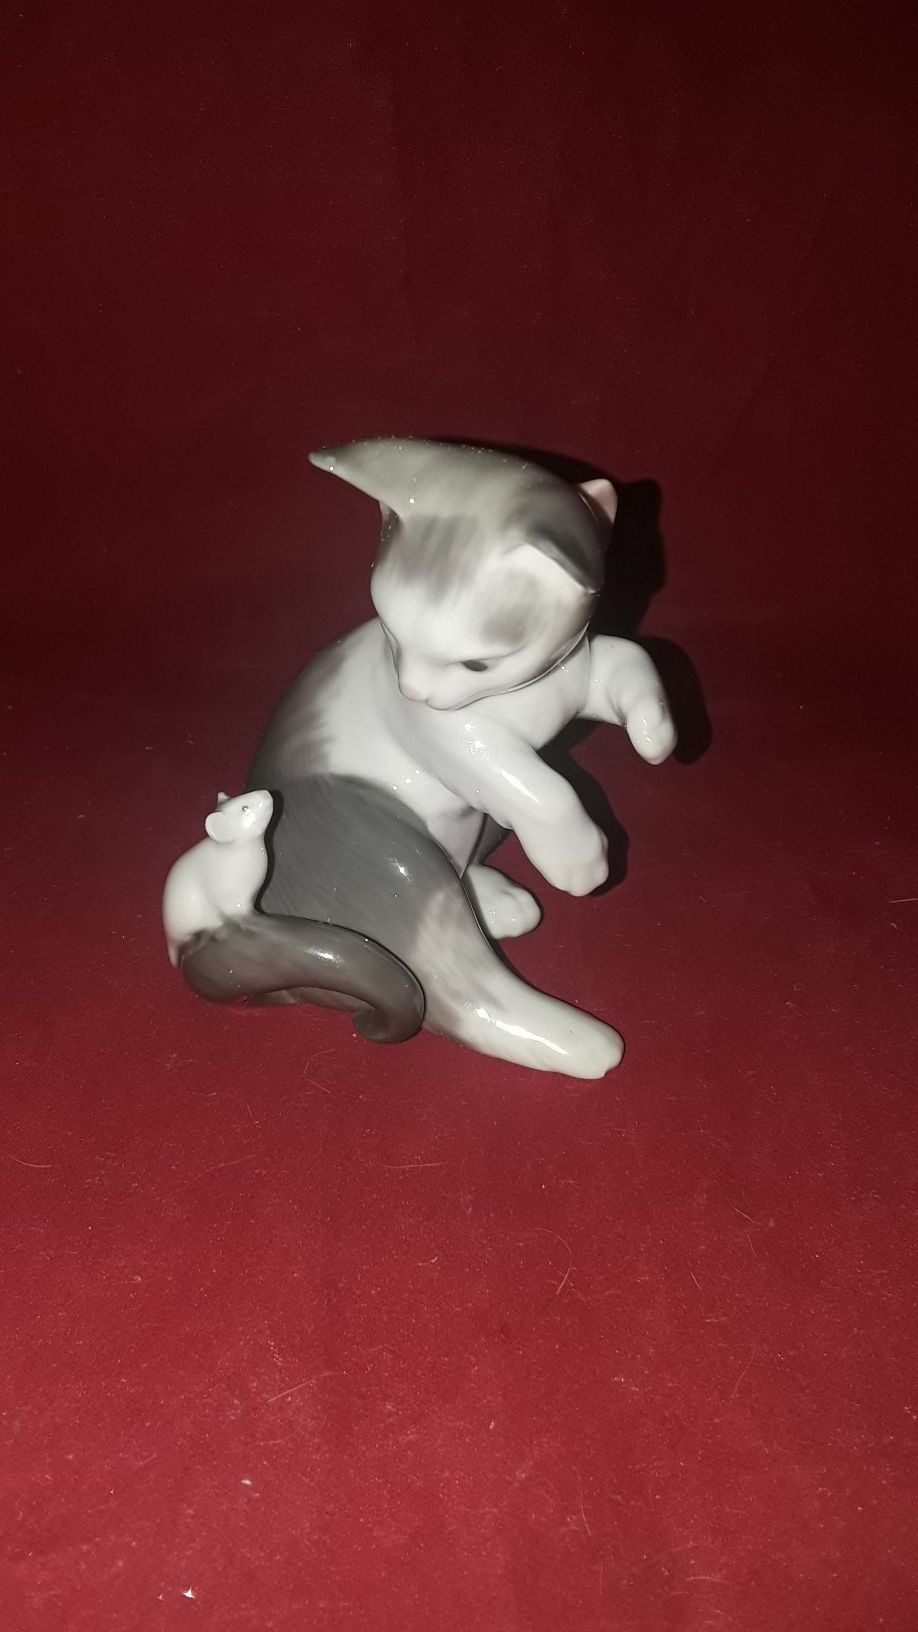 RETIRED LLADRO FINE PORCELAIN #5236 PLAYFUL KITTY CAT & MOUSE SCULPTURE FIGURINE 3-1/4" TALL IN ORIG BOX